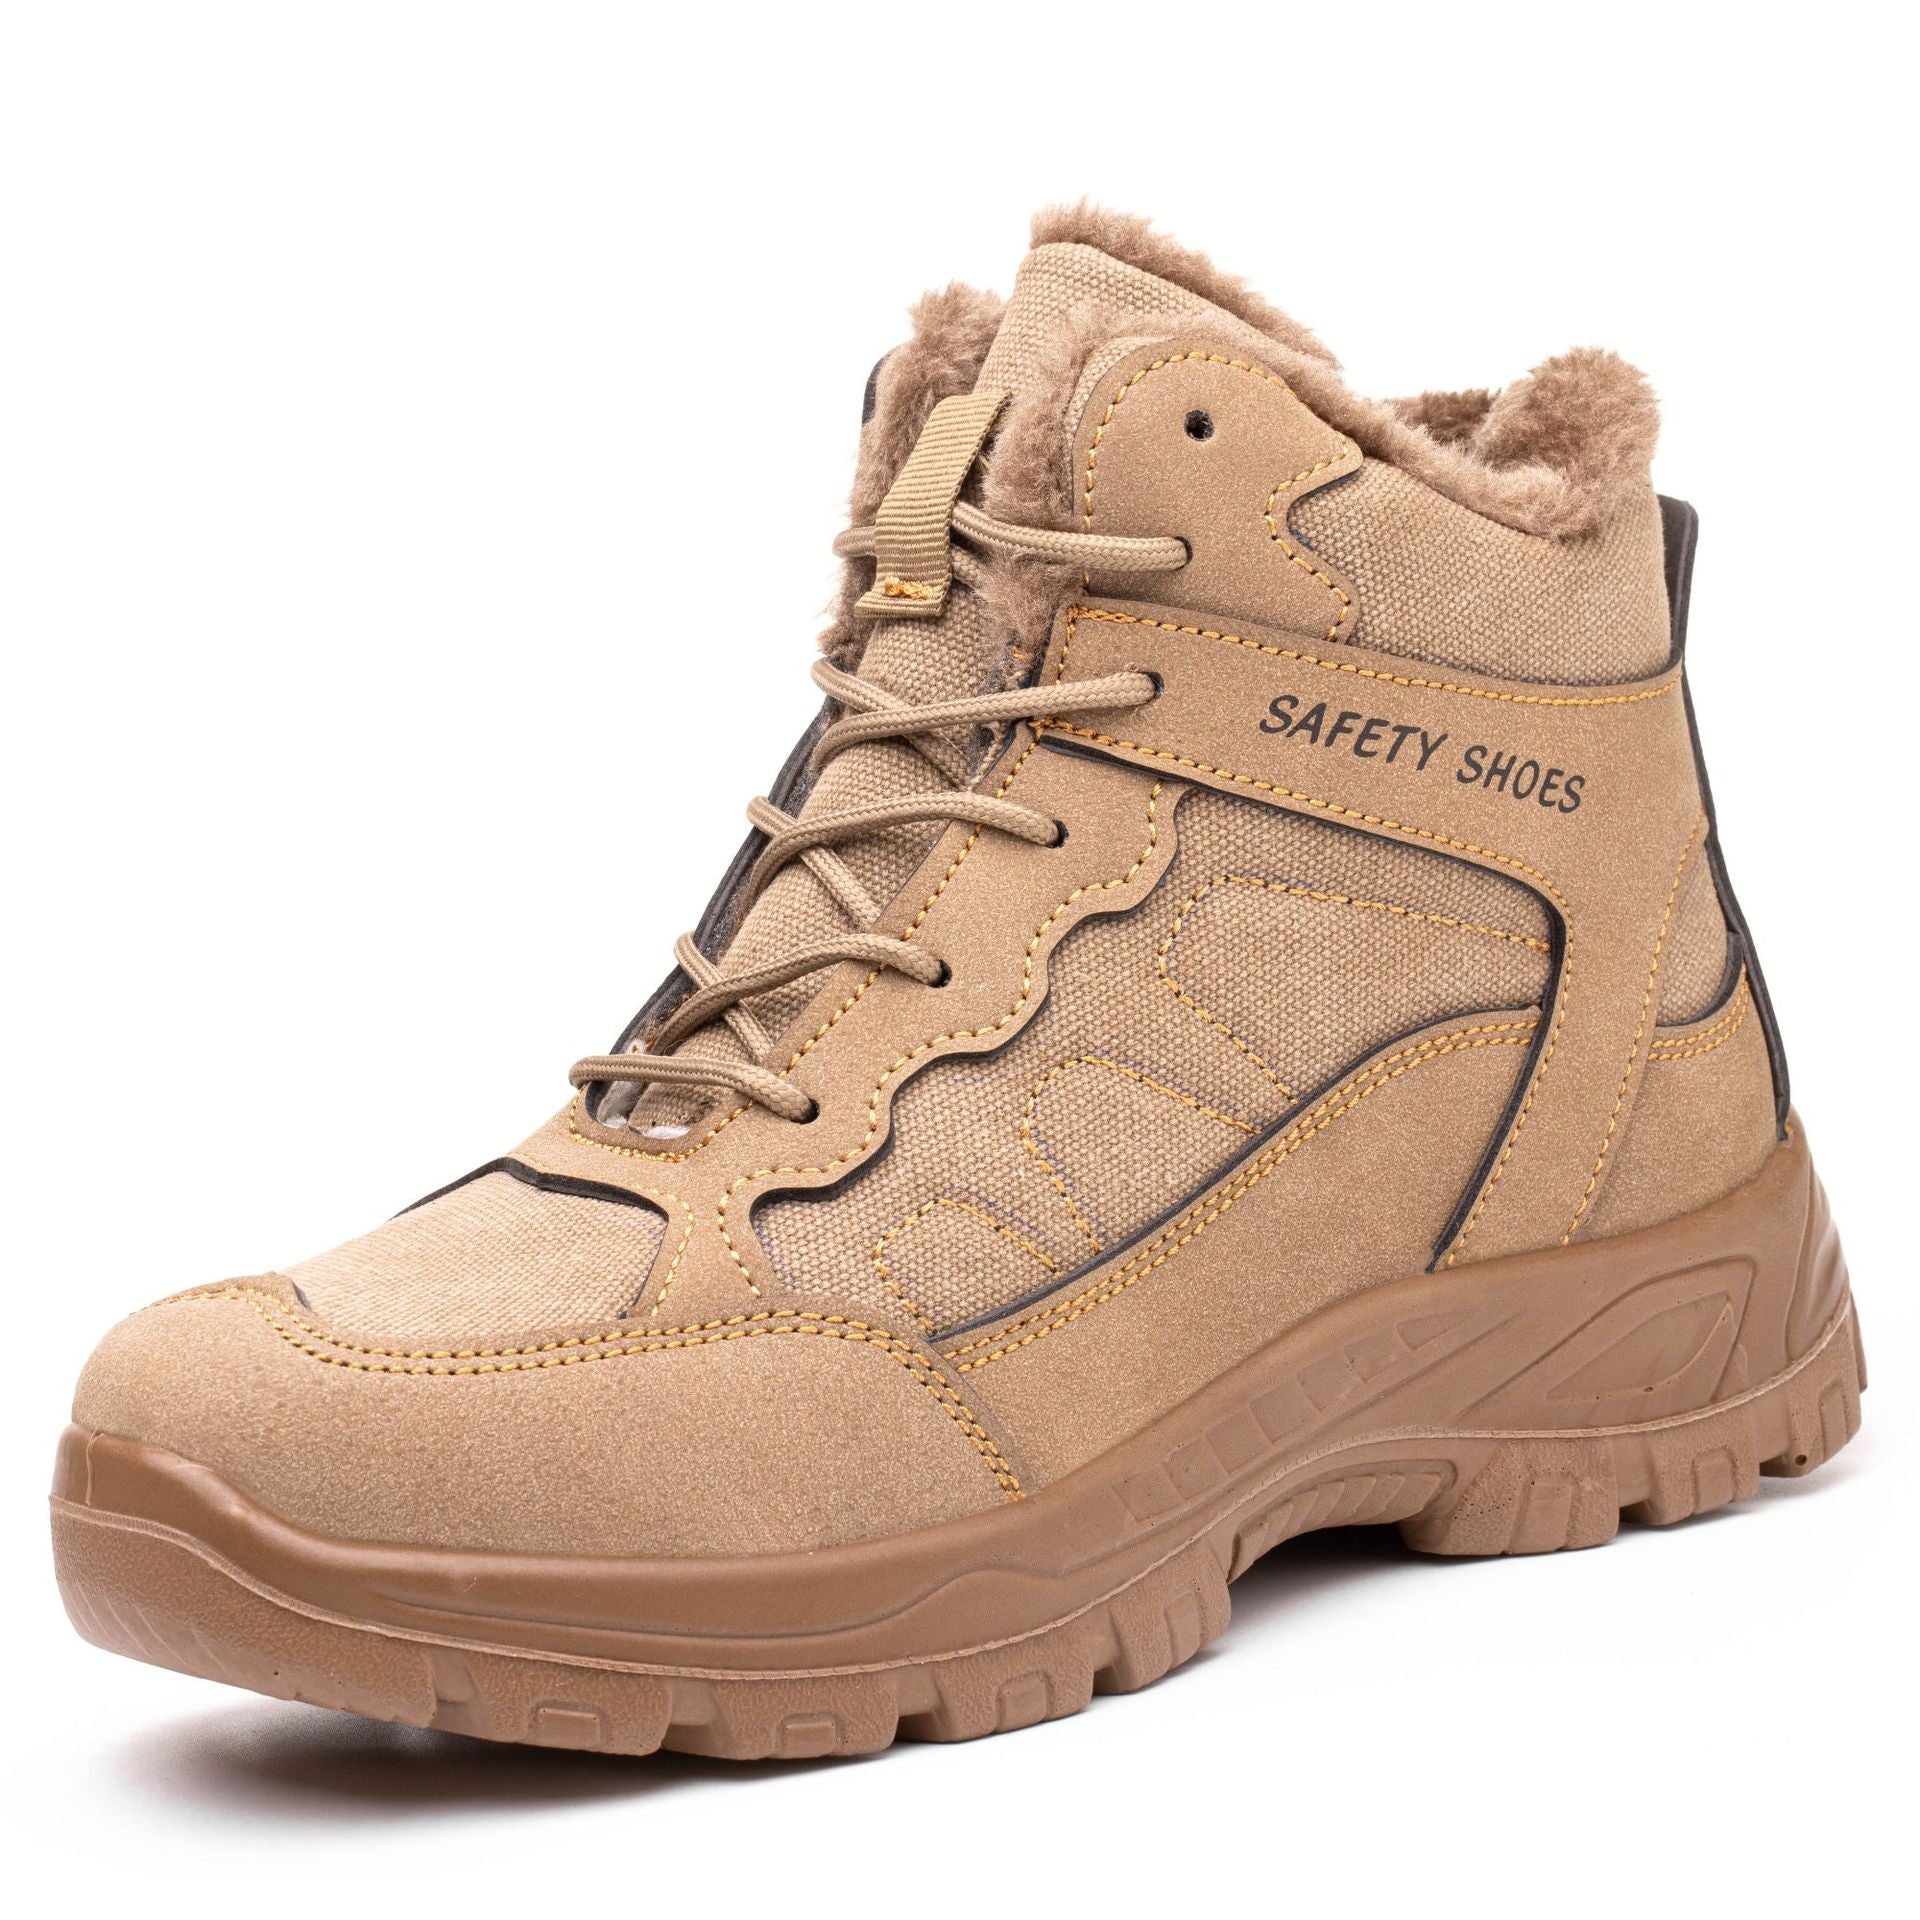 Boots winter protective steel toe